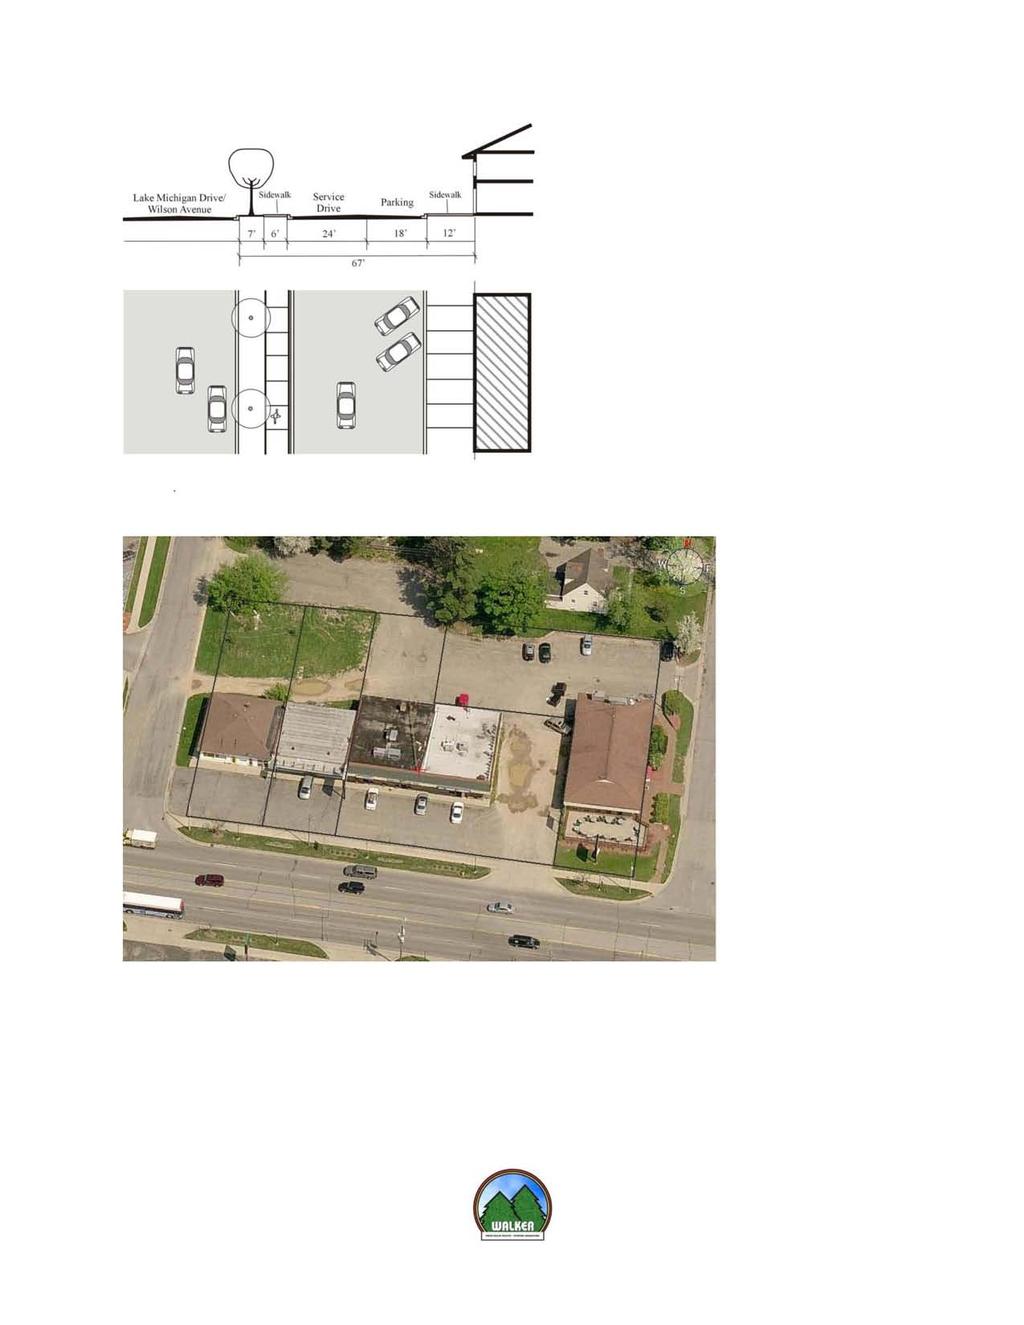 7 Figure 1: Primary Frontage Zone requirements from SDD Ordinance, Page 5.